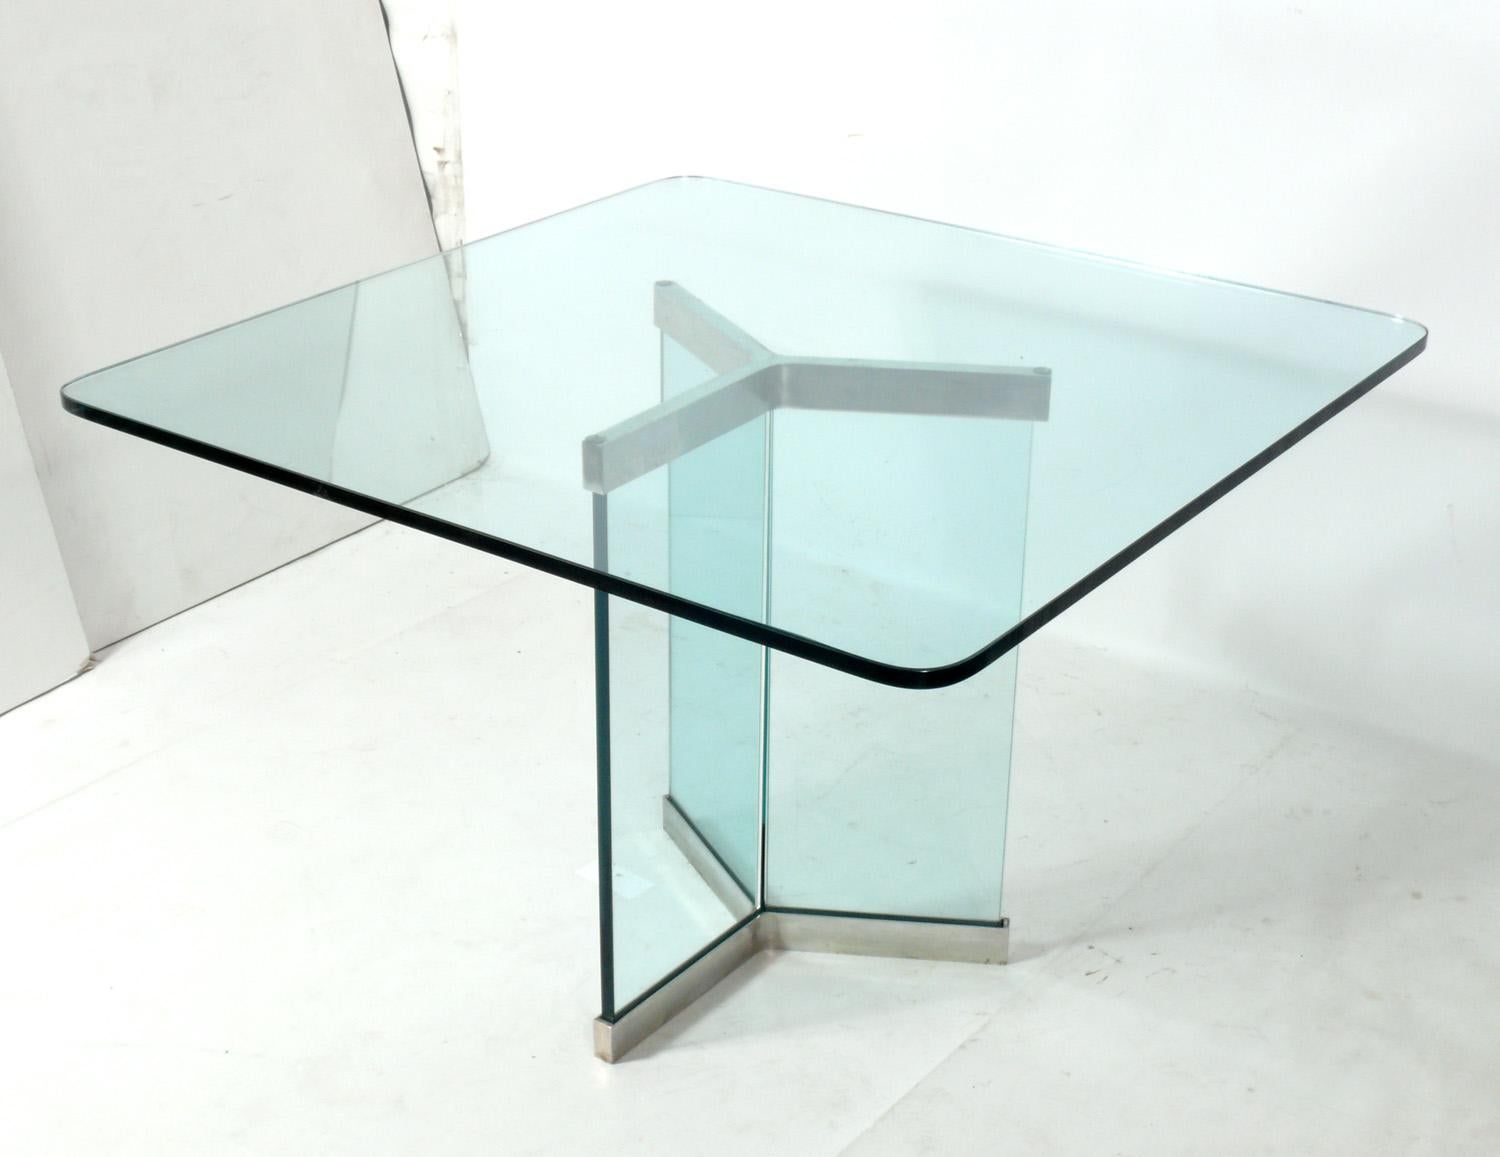 Stainless steel and thick glass Mid-Century Modern dining table, designed by Leon Rosen for Pace, American, circa 1970s.